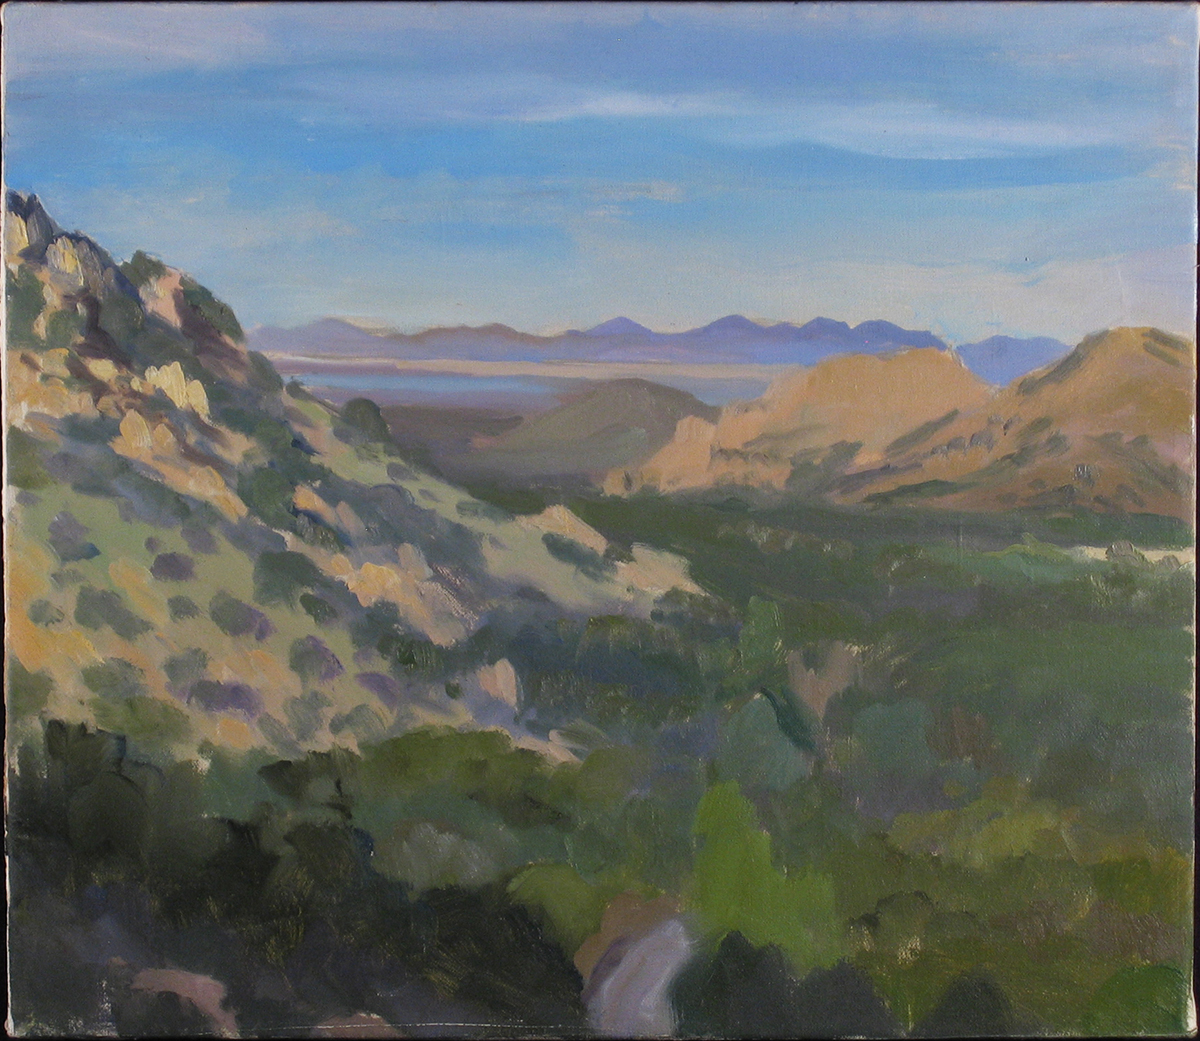  COCHISES STRONGHOLD oil on canvas 14 x 16” 2003 